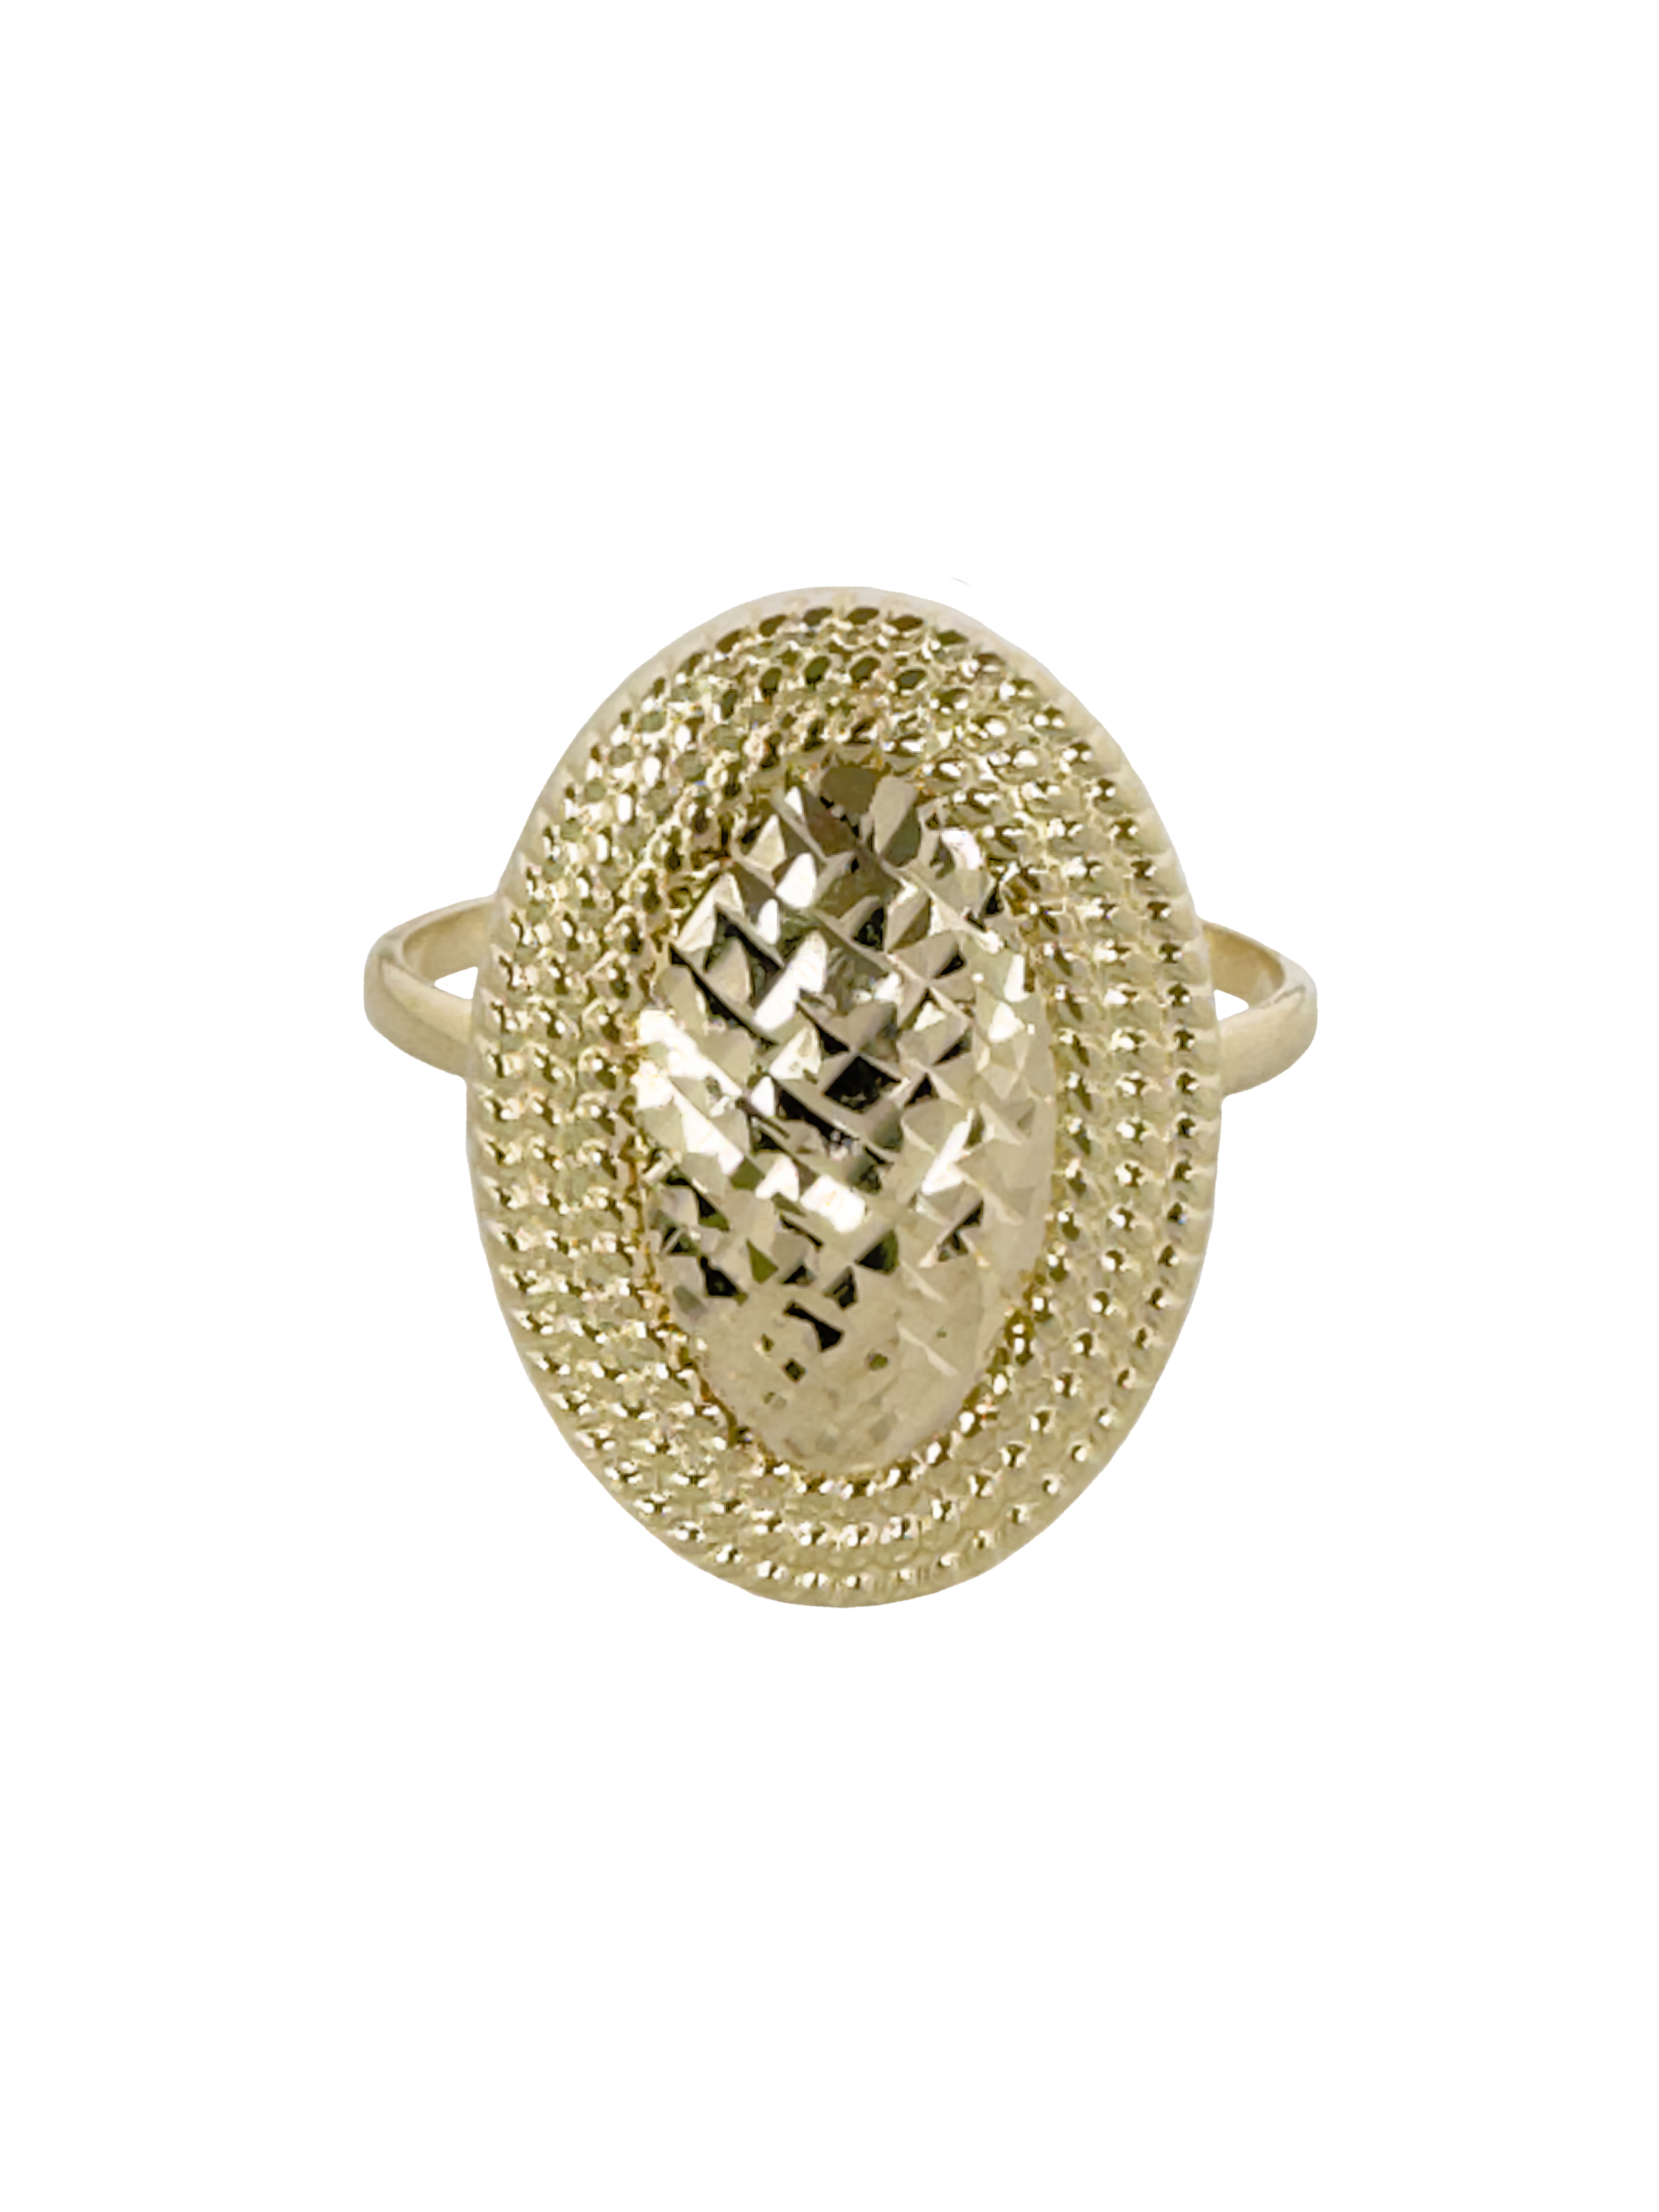 Gold women's ring with Gemsy engraving